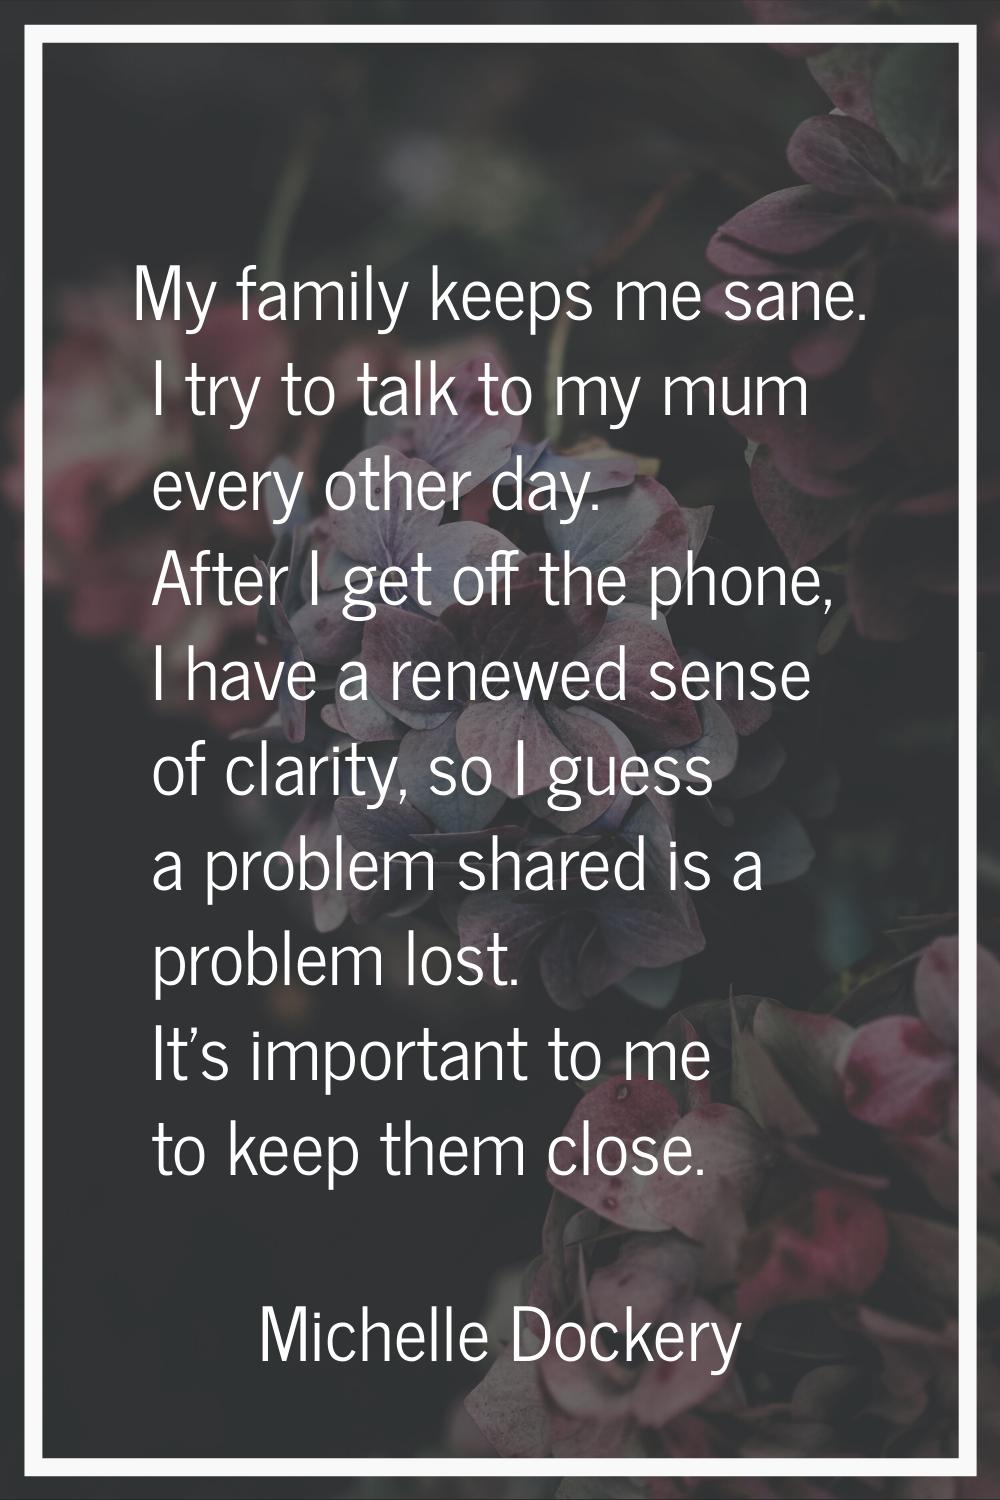 My family keeps me sane. I try to talk to my mum every other day. After I get off the phone, I have